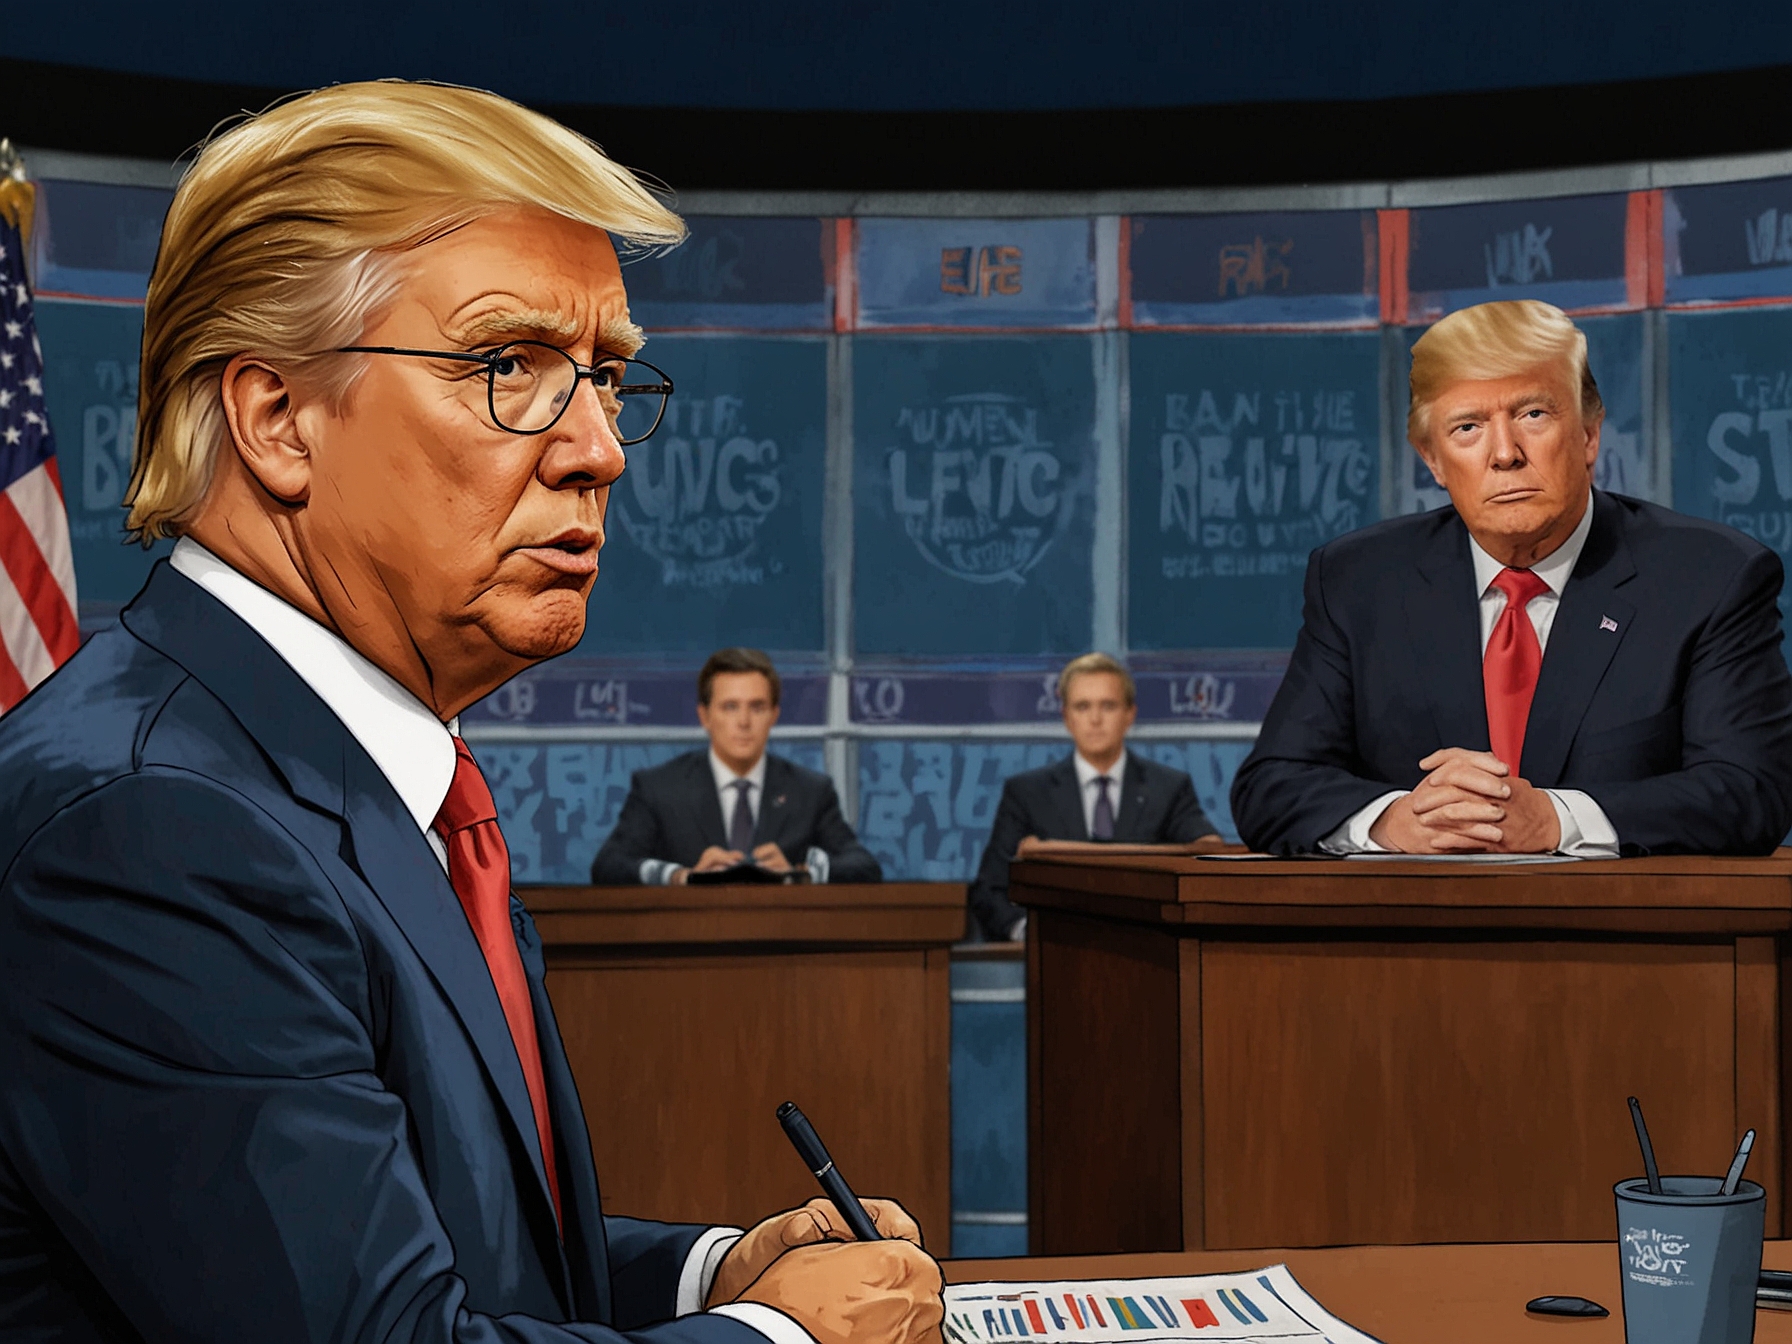 Image showing NBC's Lester Holt as the debate moderator, with Trump's claims of media bias depicted through a split screen showing supportive and critical news headlines.